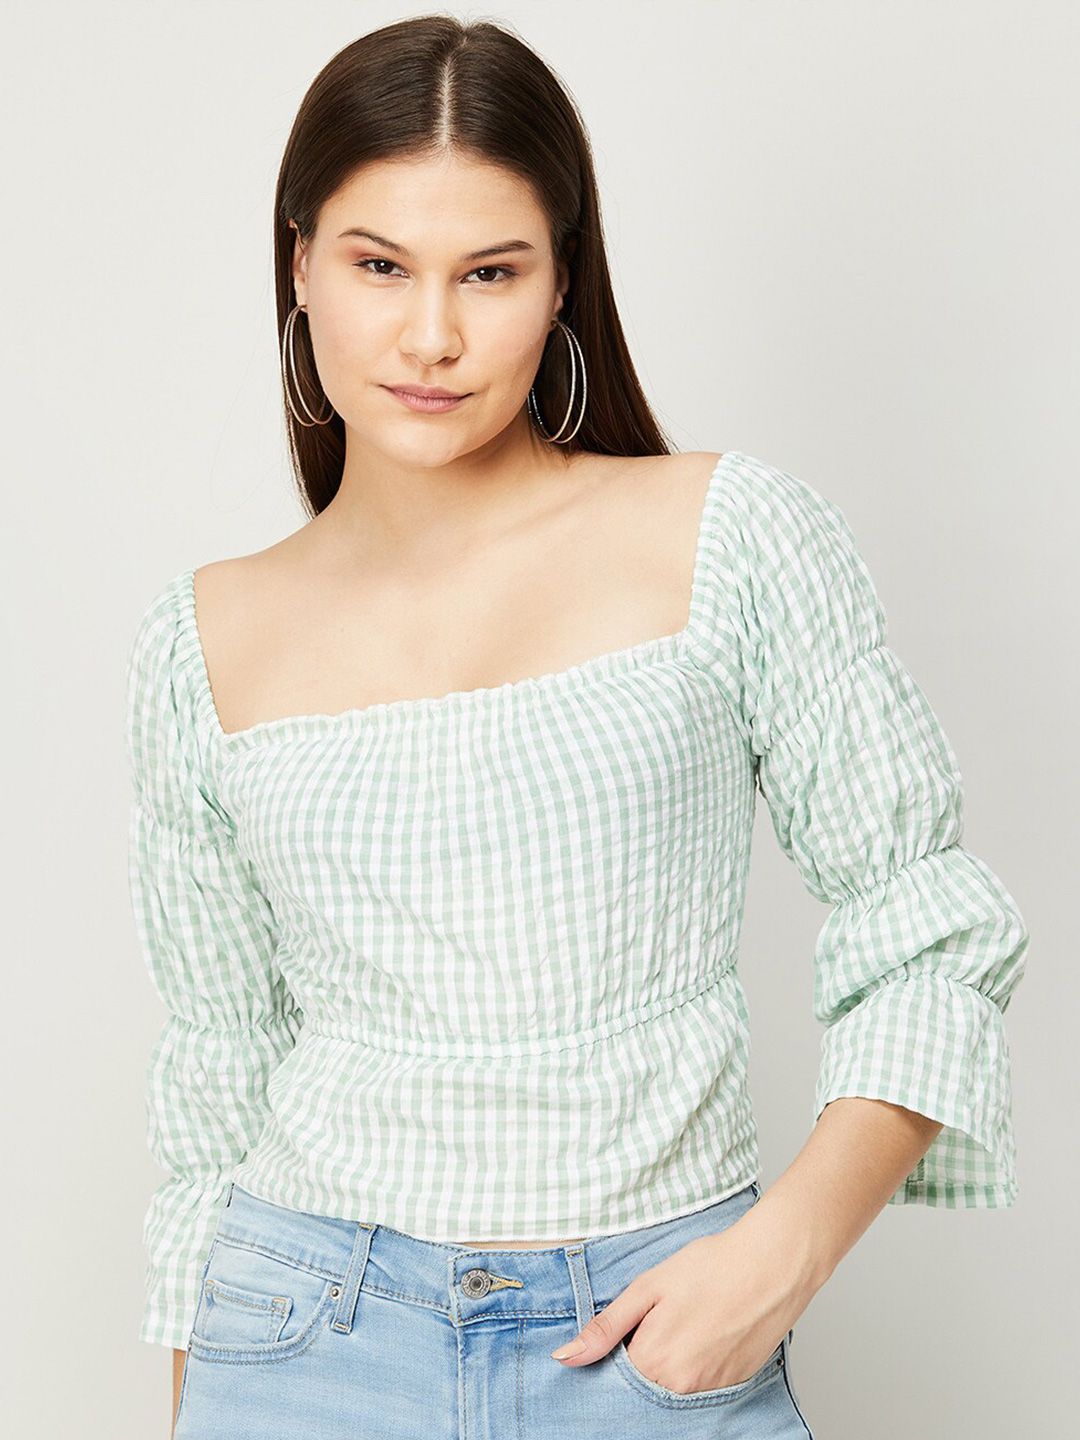 Ginger by Lifestyle Women Green & White Checked Top Price in India